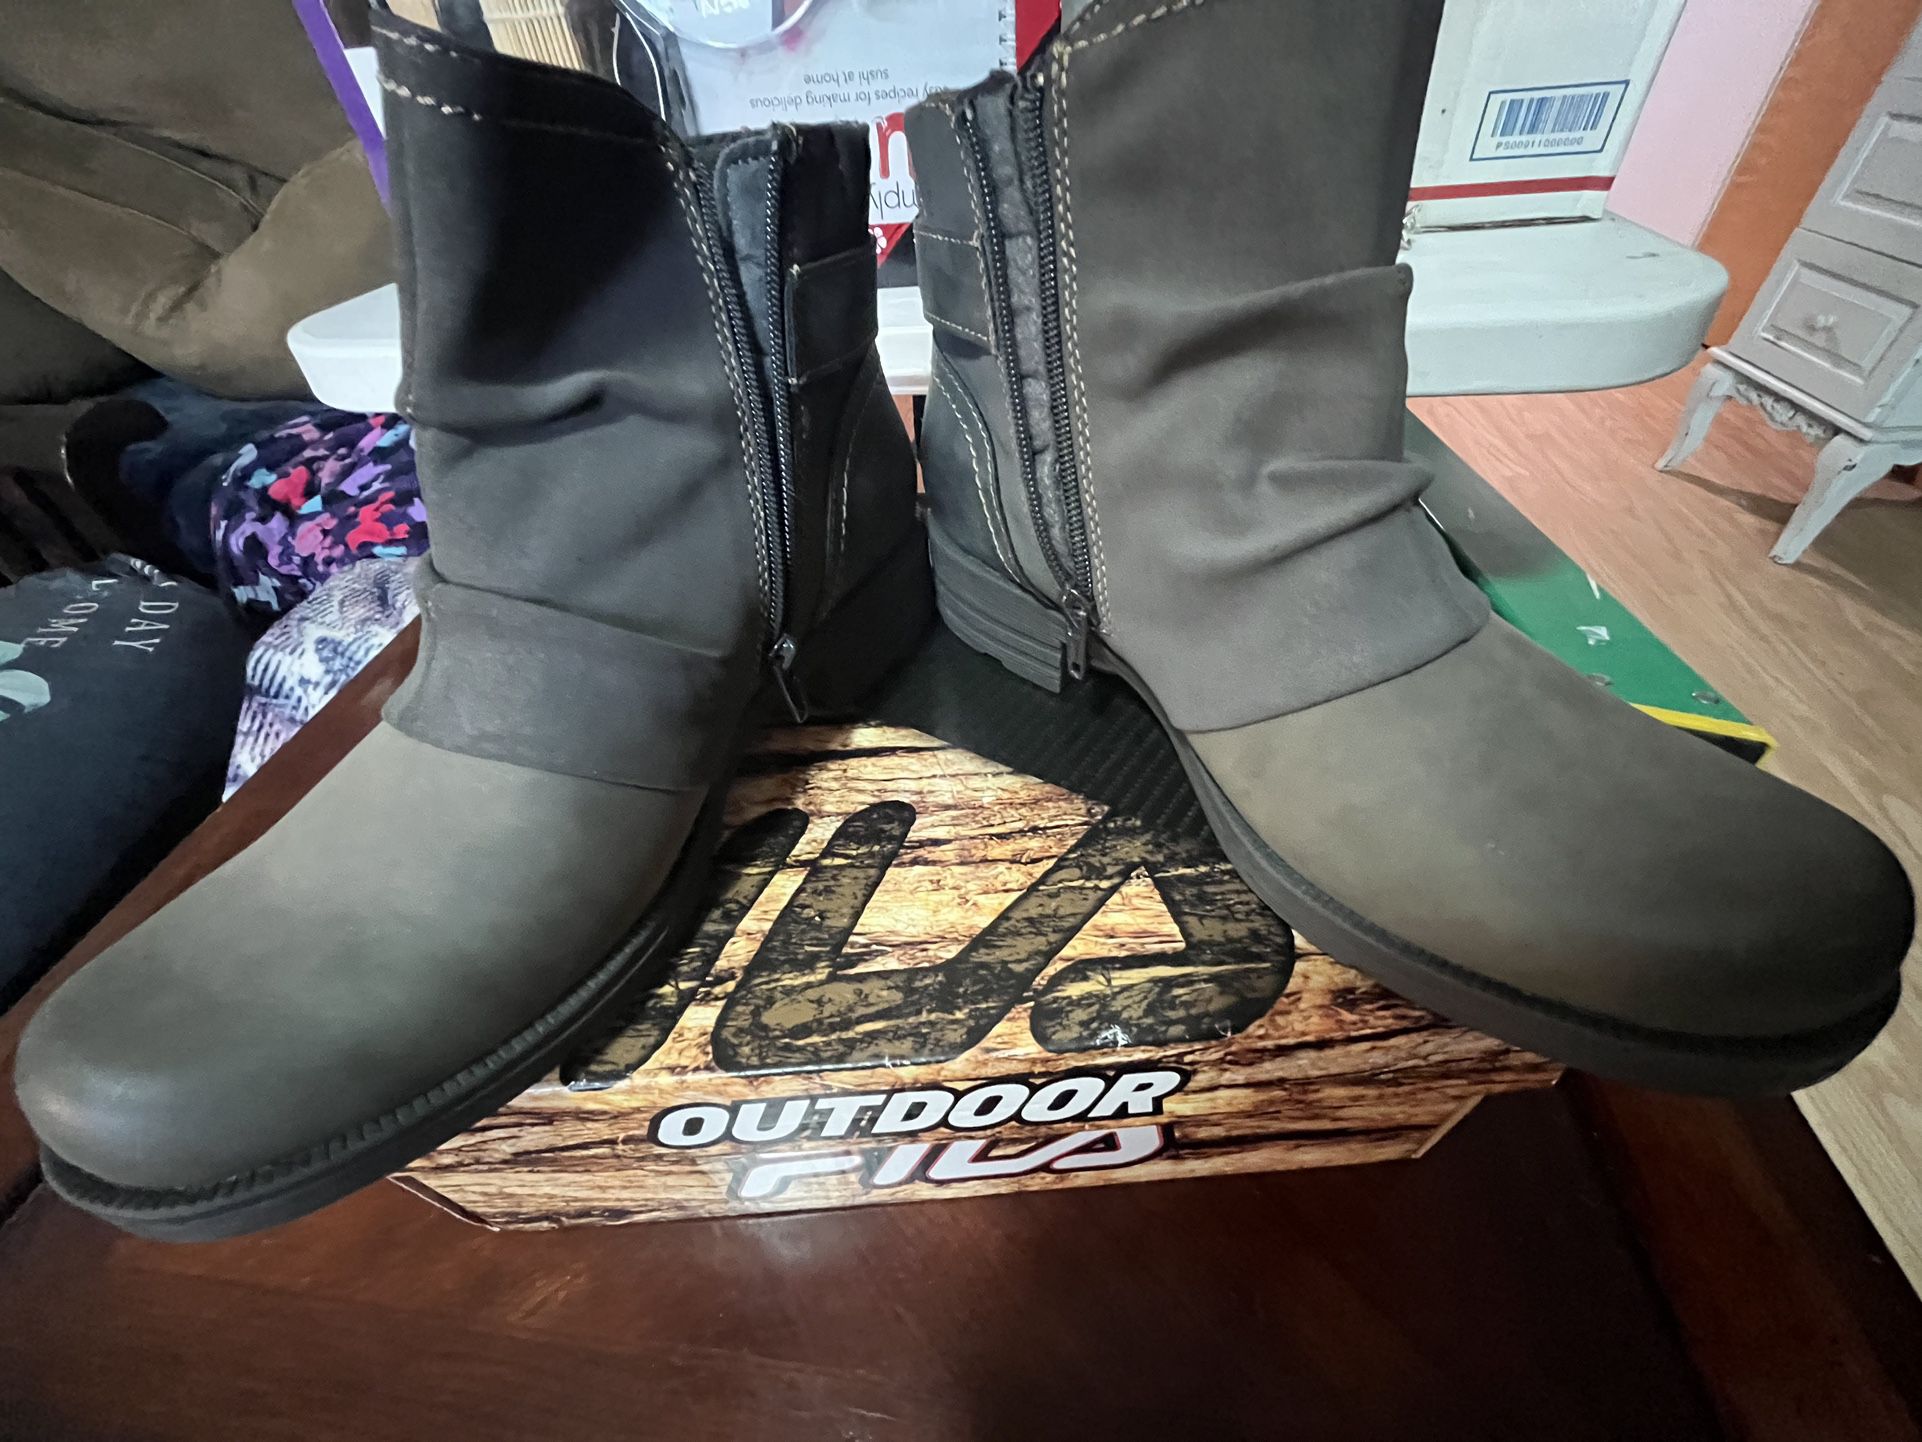 Women’s Boots (color Taupe/grey) Size 9  $20